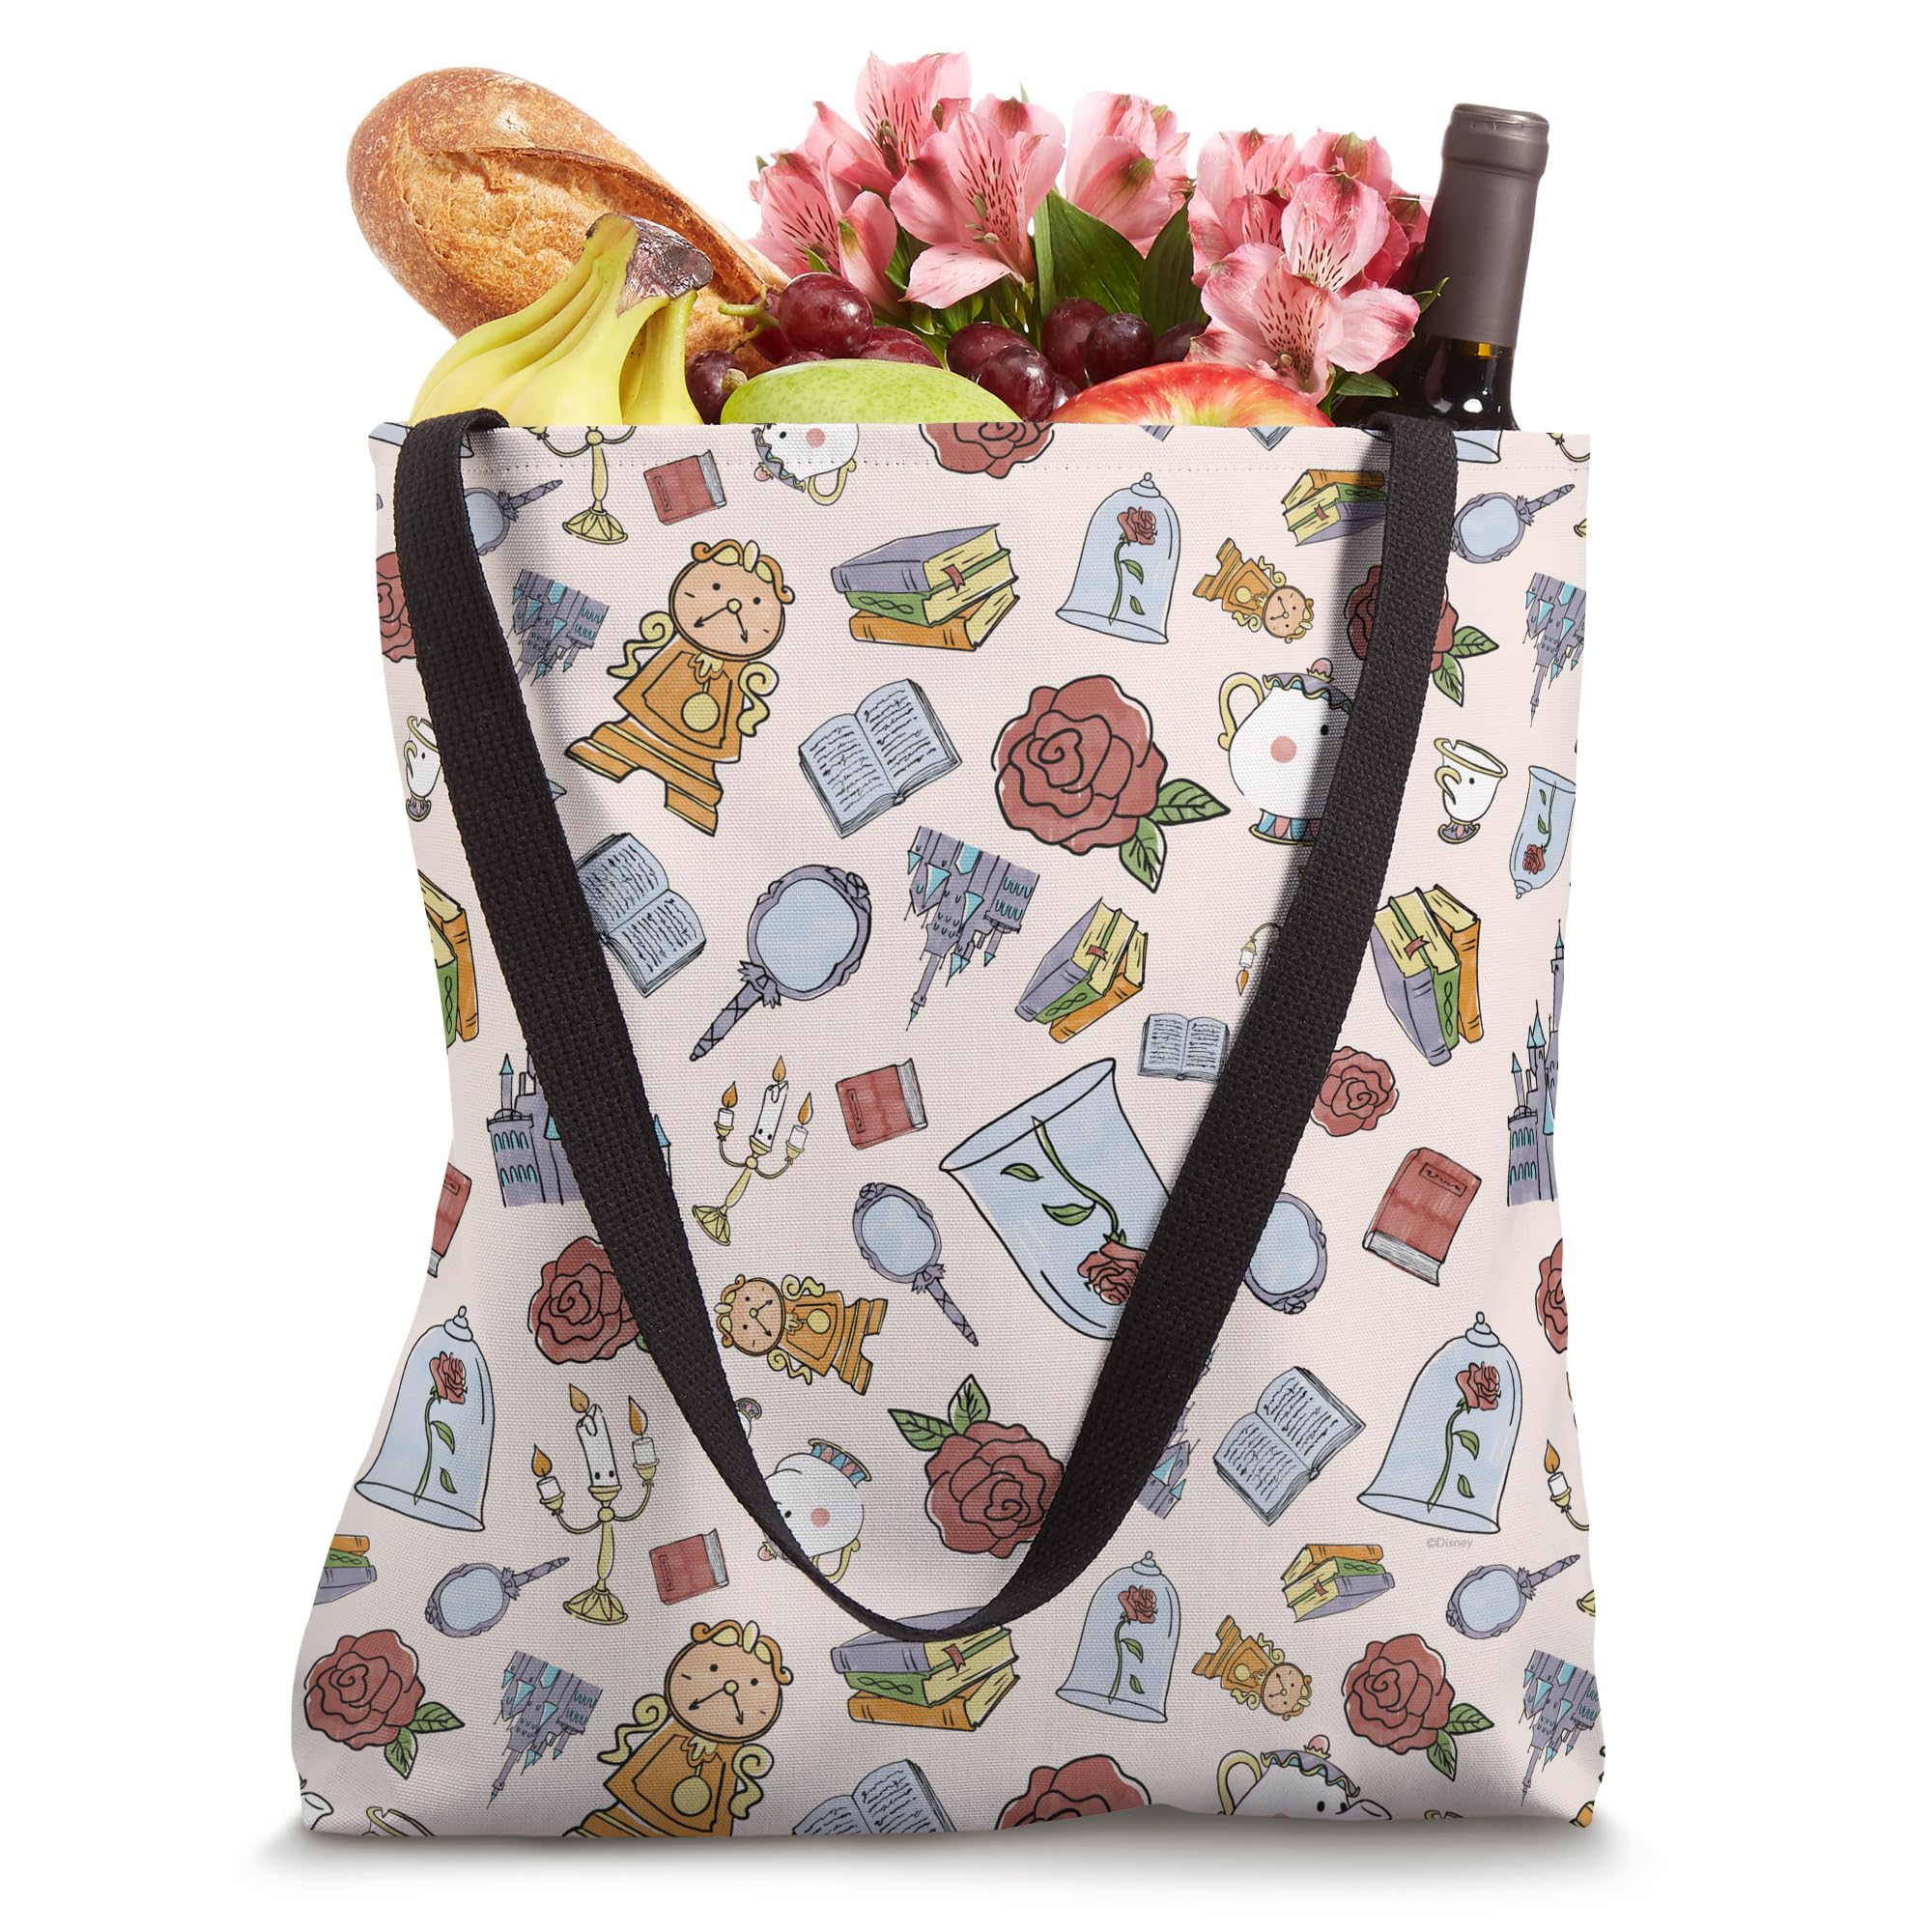 Disney Beauty and The Beast Enchanted Castle Print Tote Bag